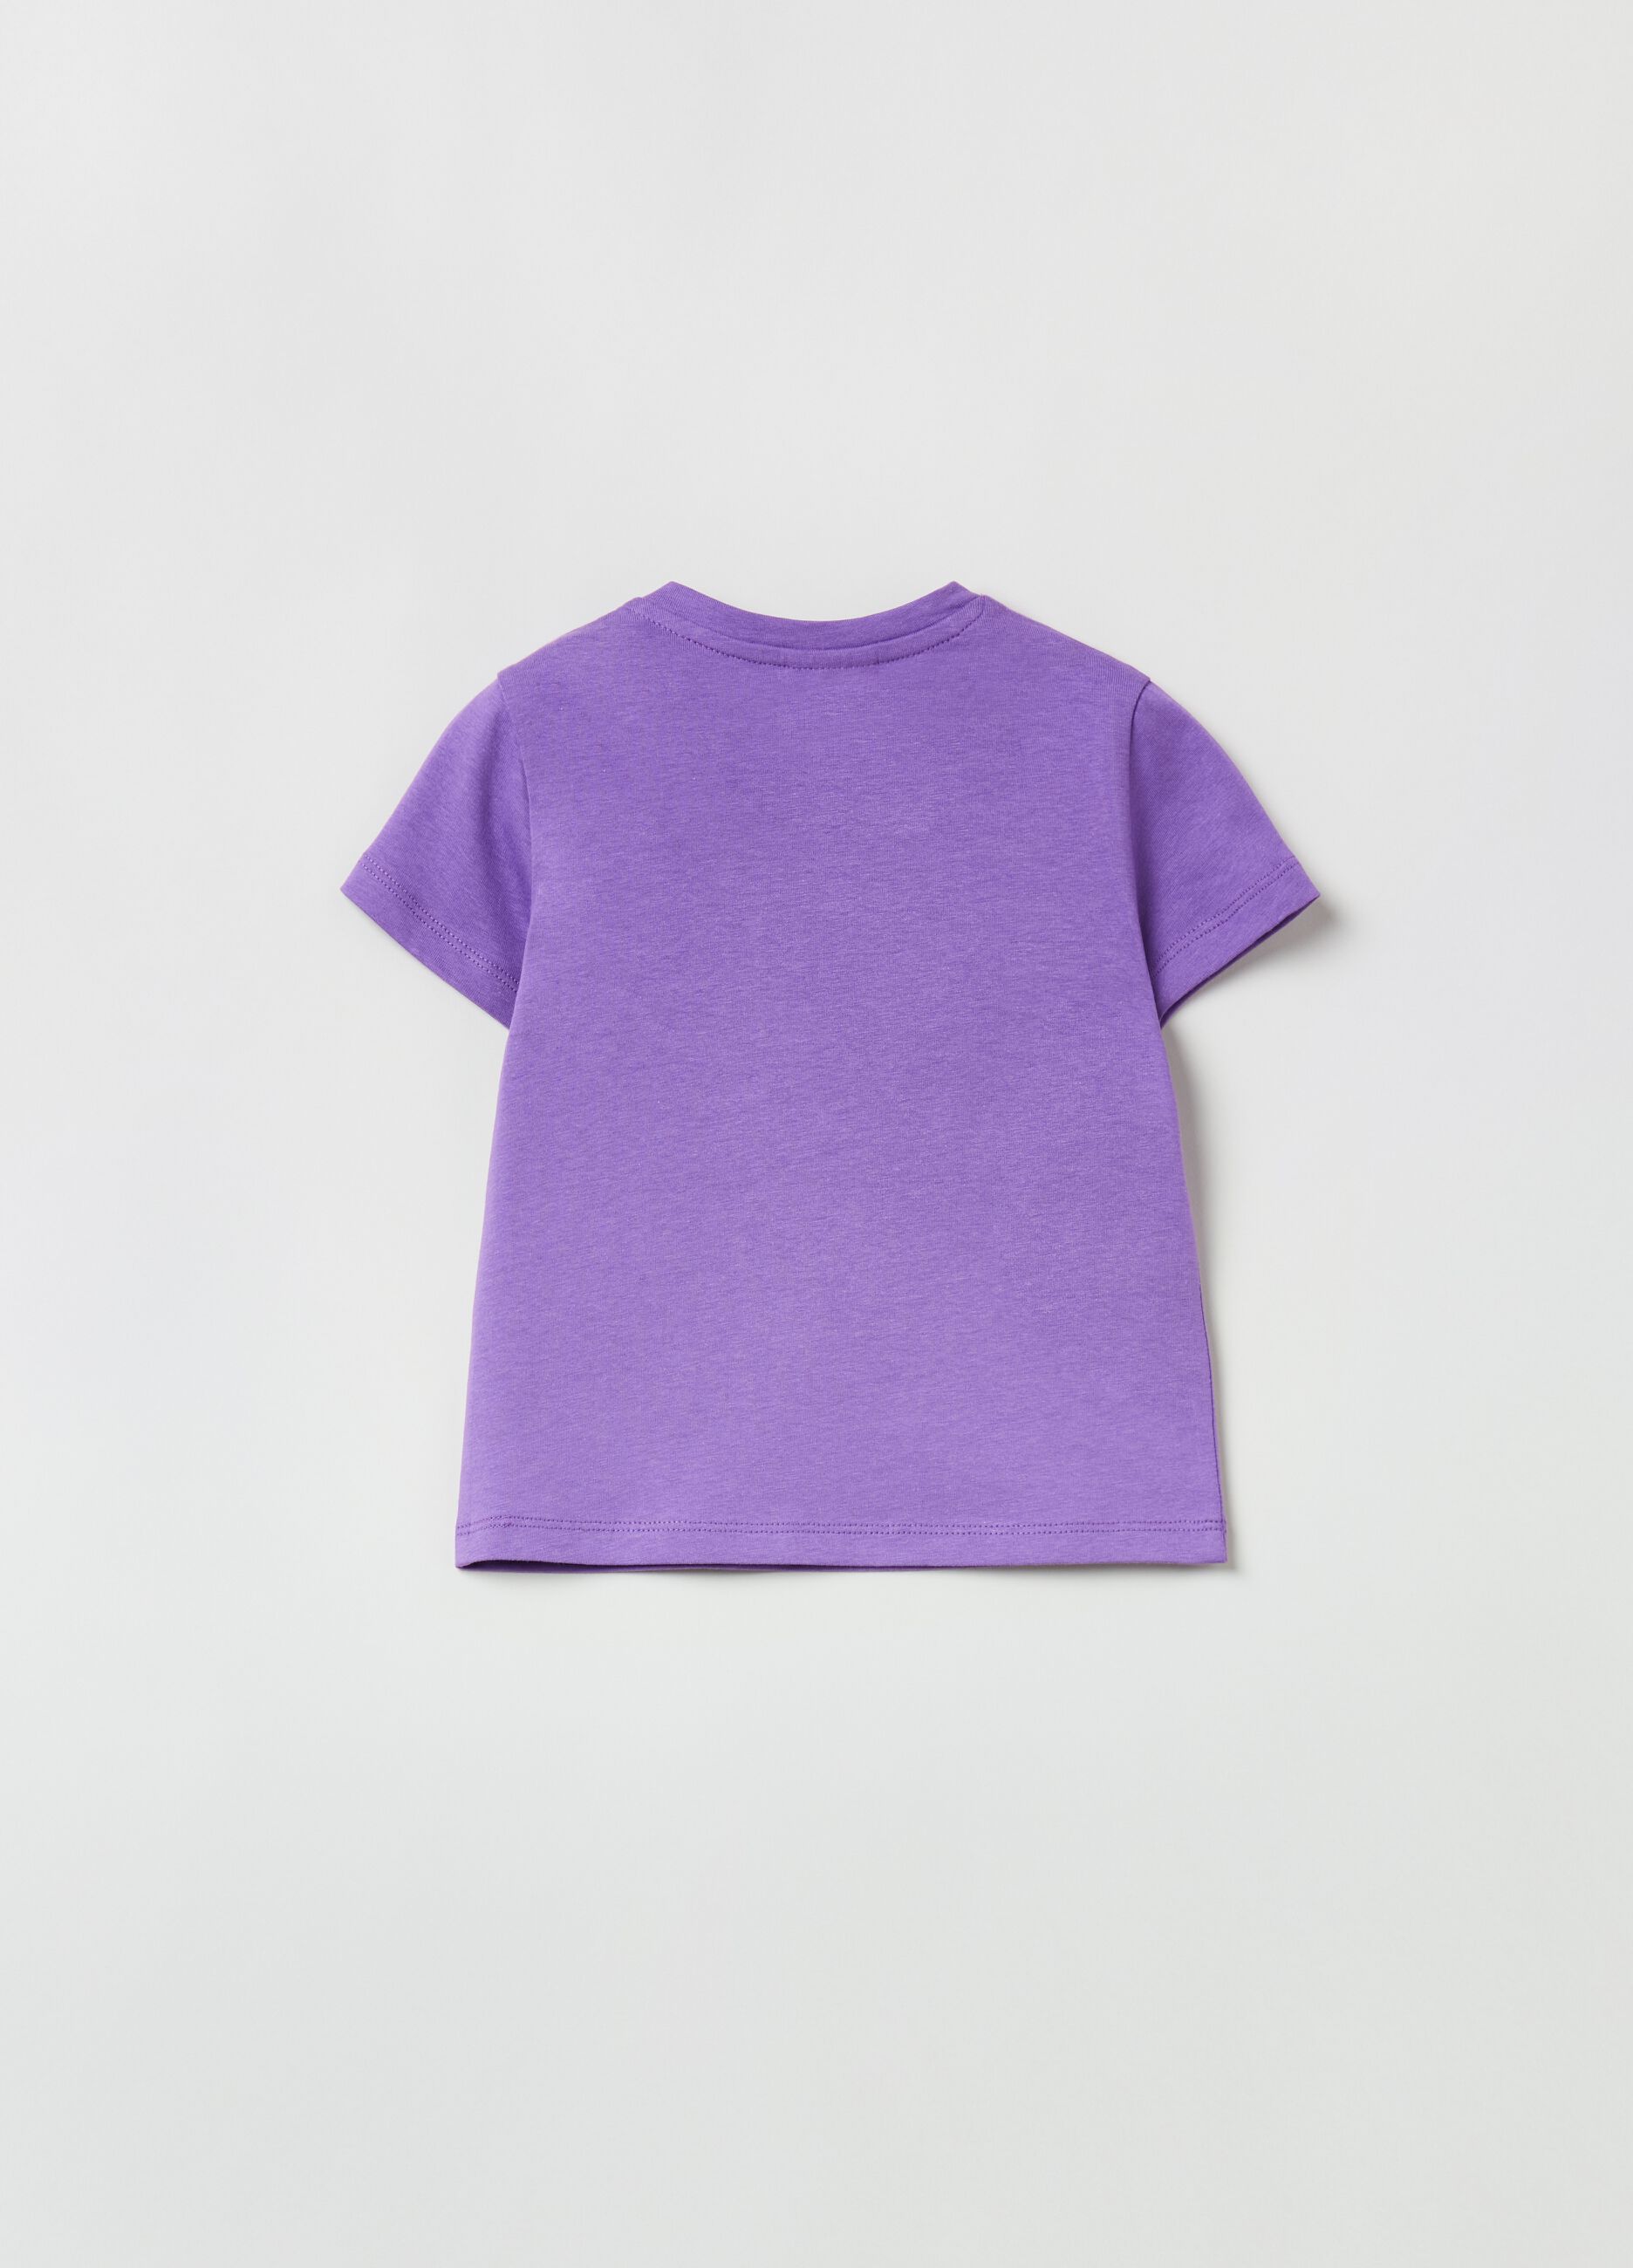 Cotton T-shirt with pocket and print